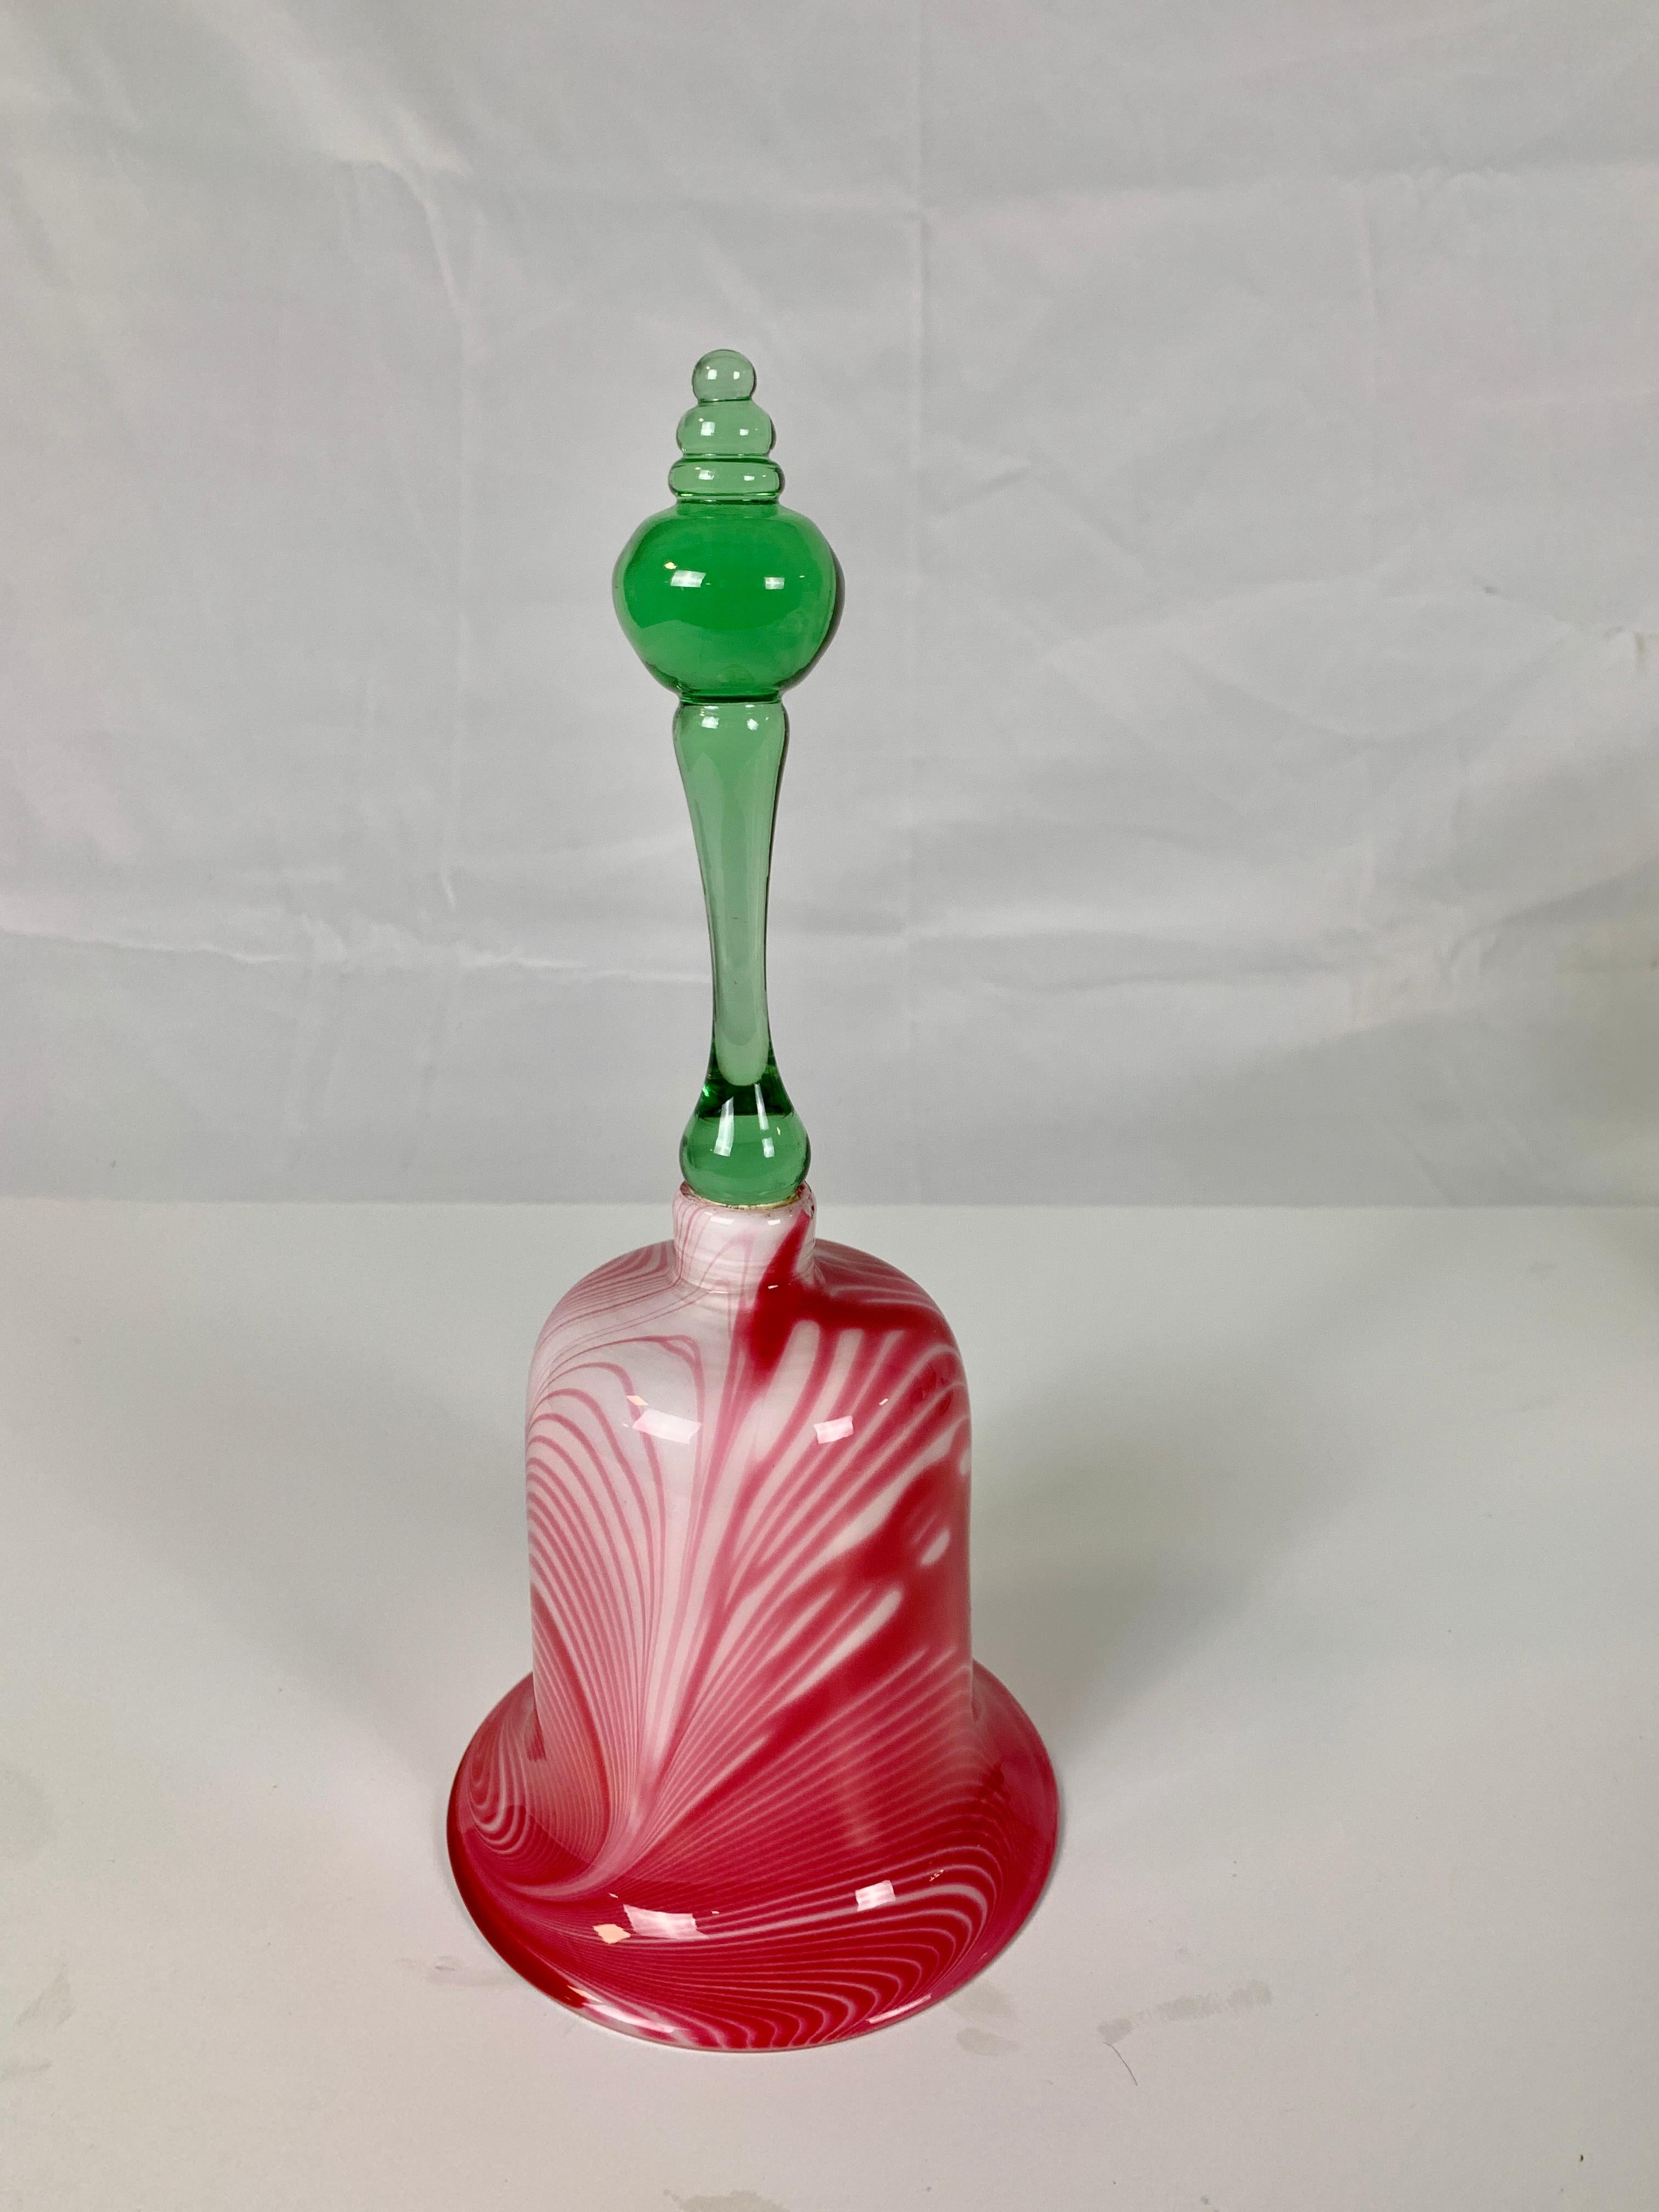 Hand-Crafted Christmas Bell Antique Nailsea Glass Bell Red & White with Green Handle c 1840